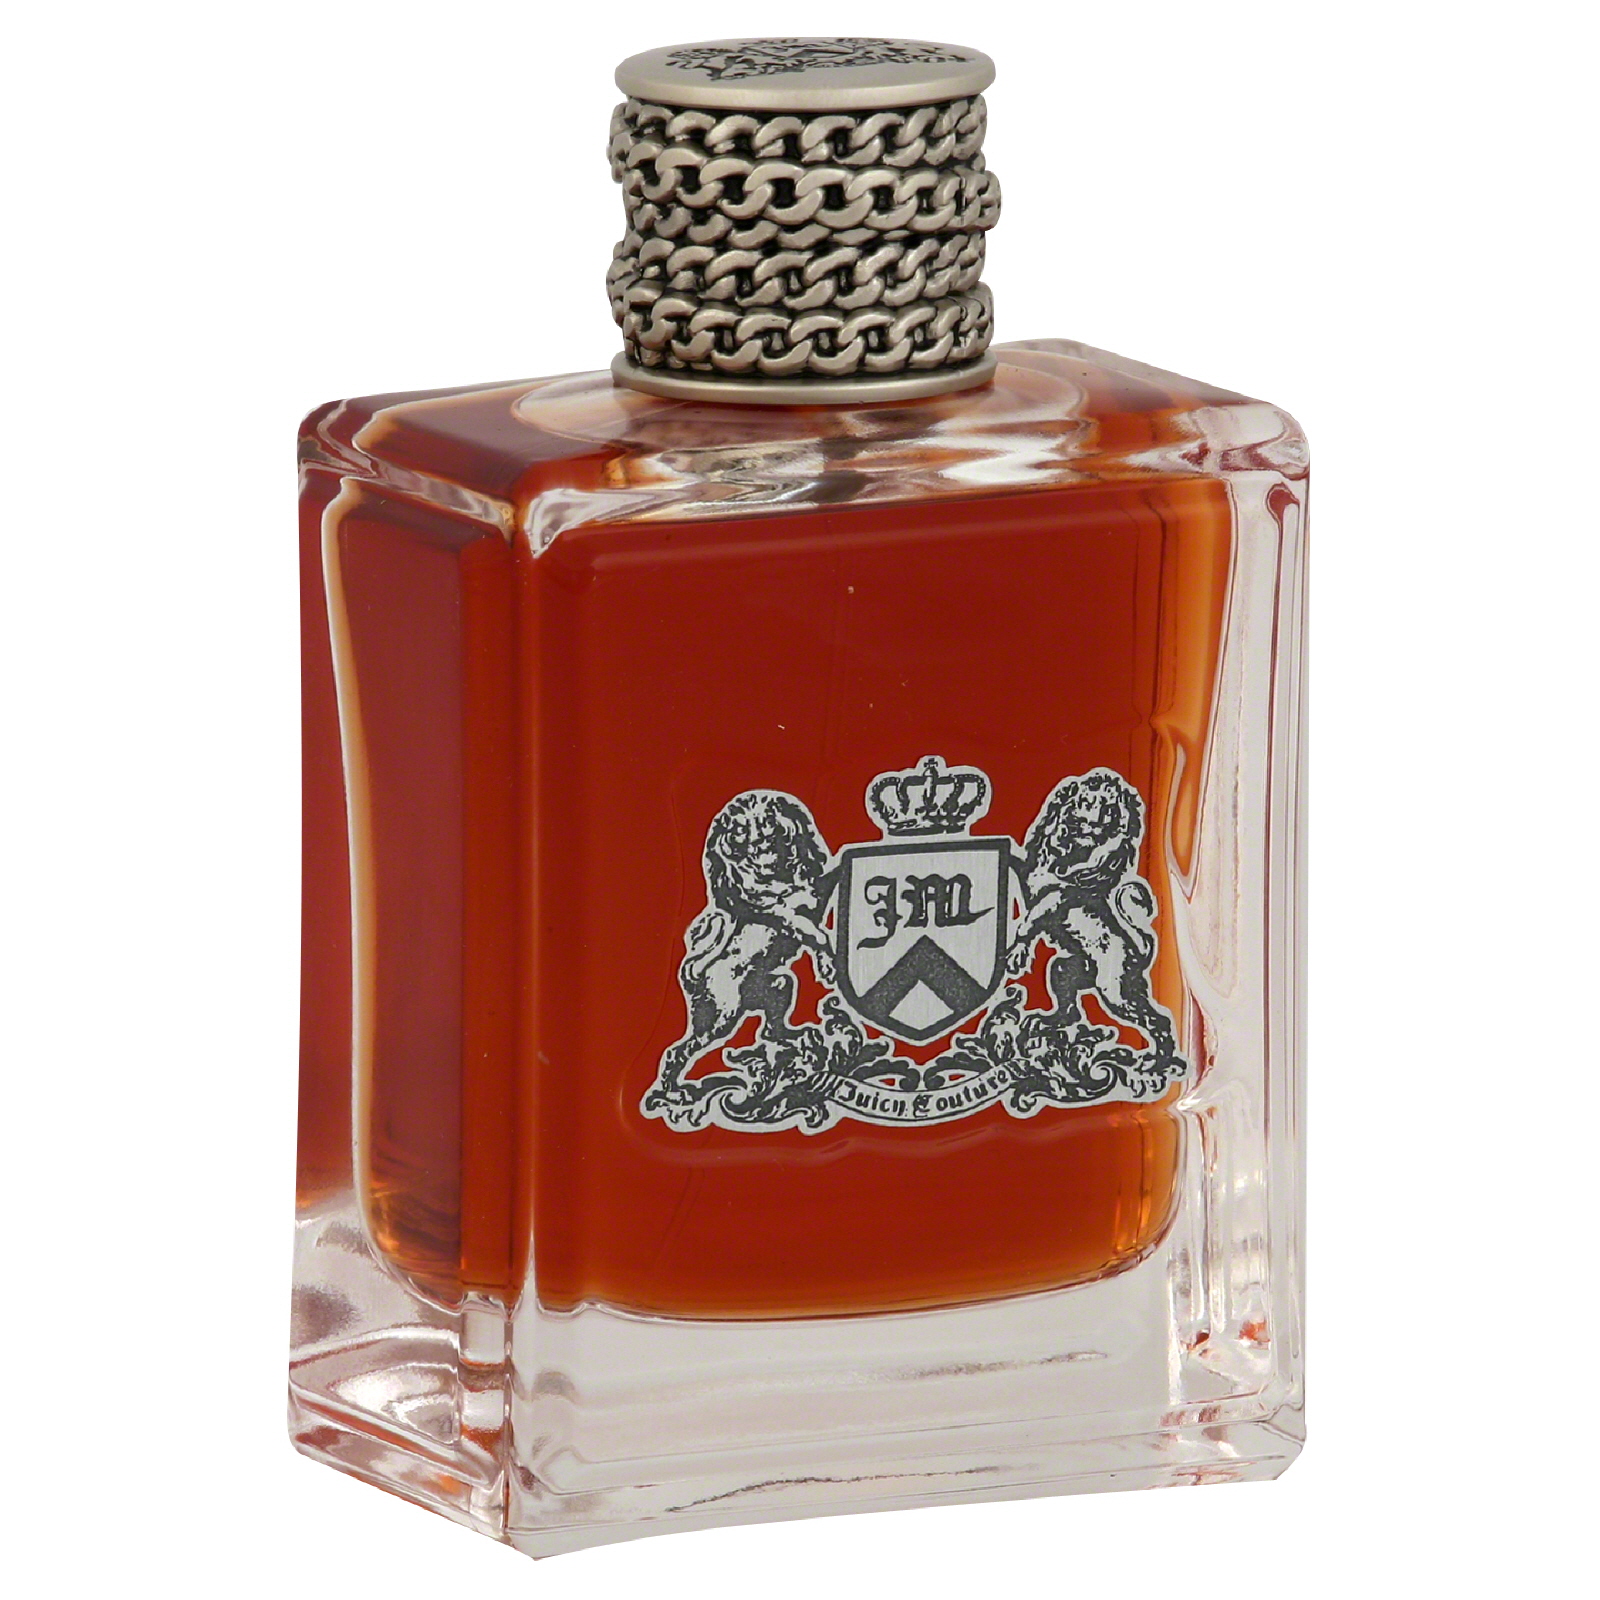 Dirty English by Juicy Couture EDT Spray 3.4 Oz for Men